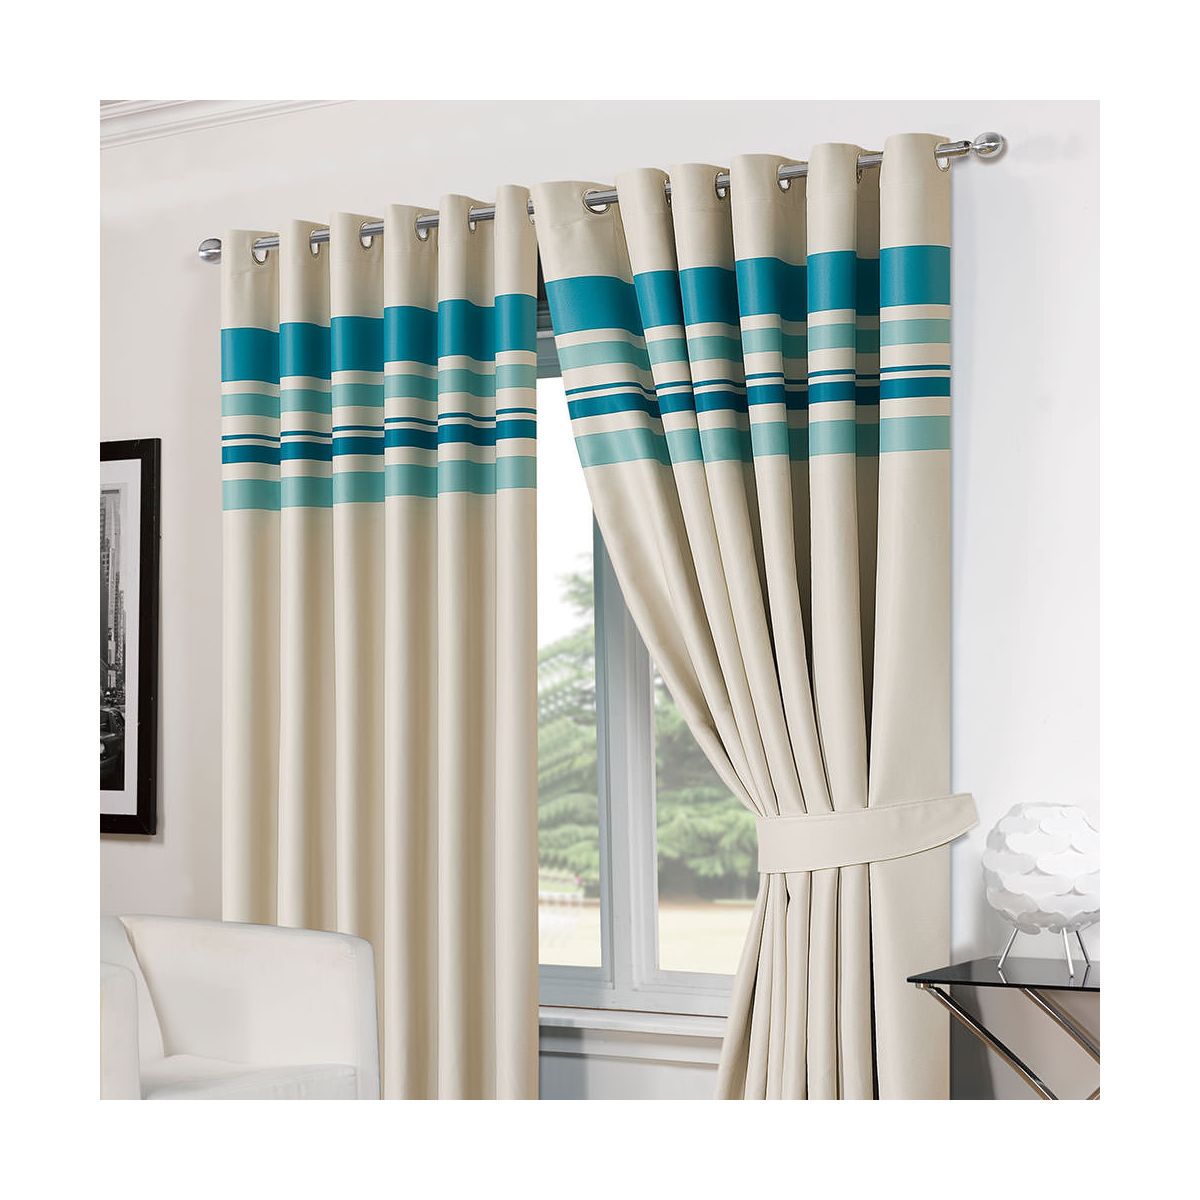 Luxury Ring Top Fully Lined Pair Thermal Blackout Ready Made Eyelet Curtain Teal Striped 90" width x 72" drop including Free Tie backs